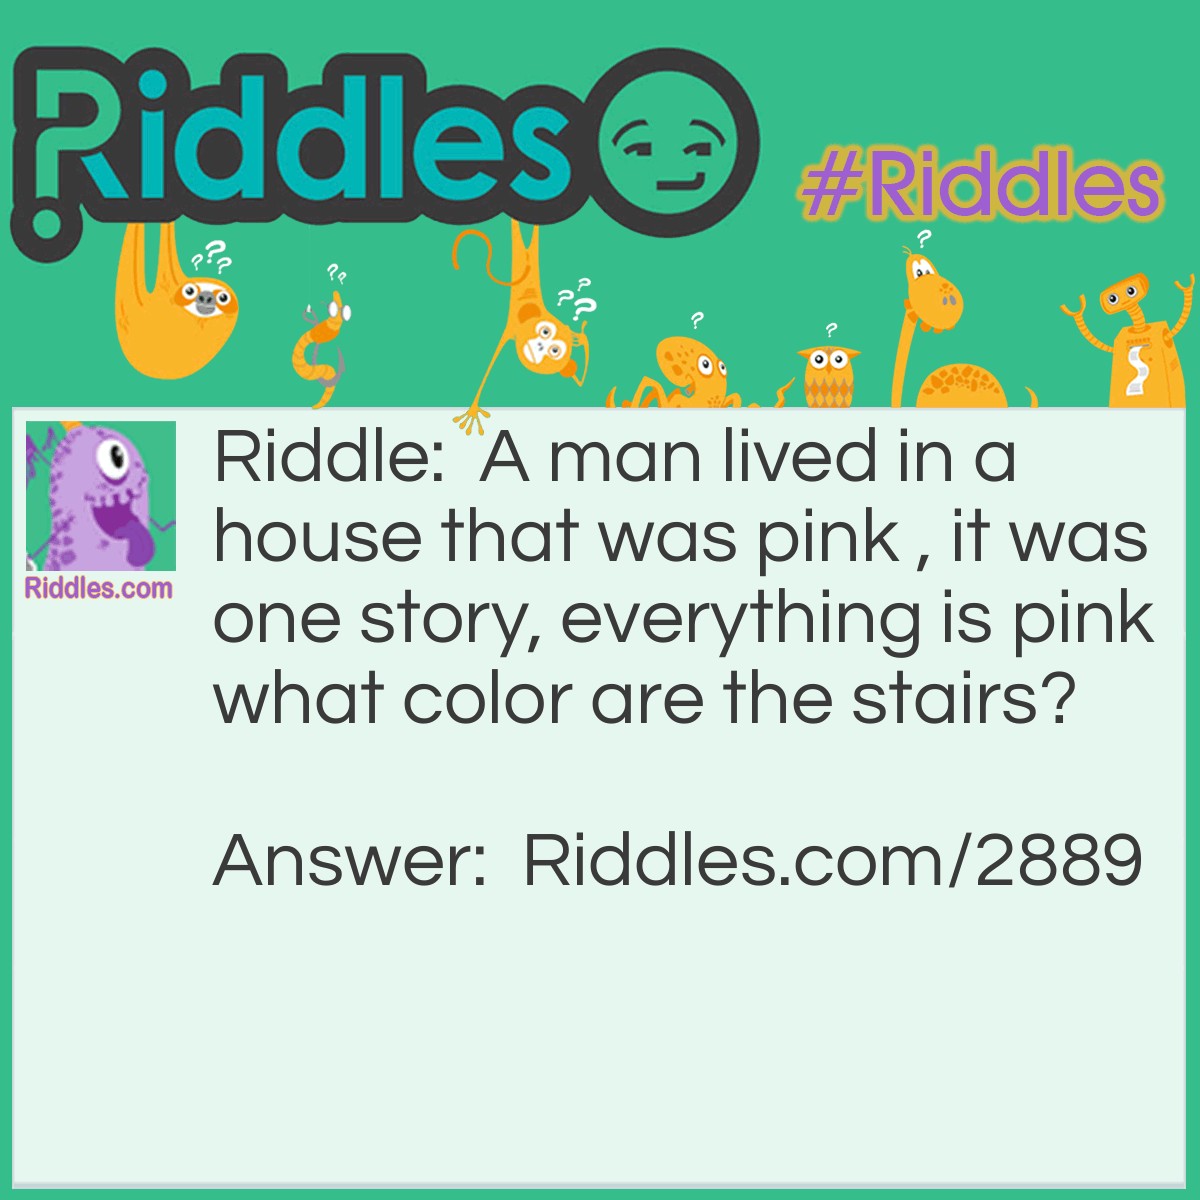 Riddle: A man lived in a house that was pink , it was one story, everything is pink, what color are the stairs? Answer: There are no stairs, it is one story